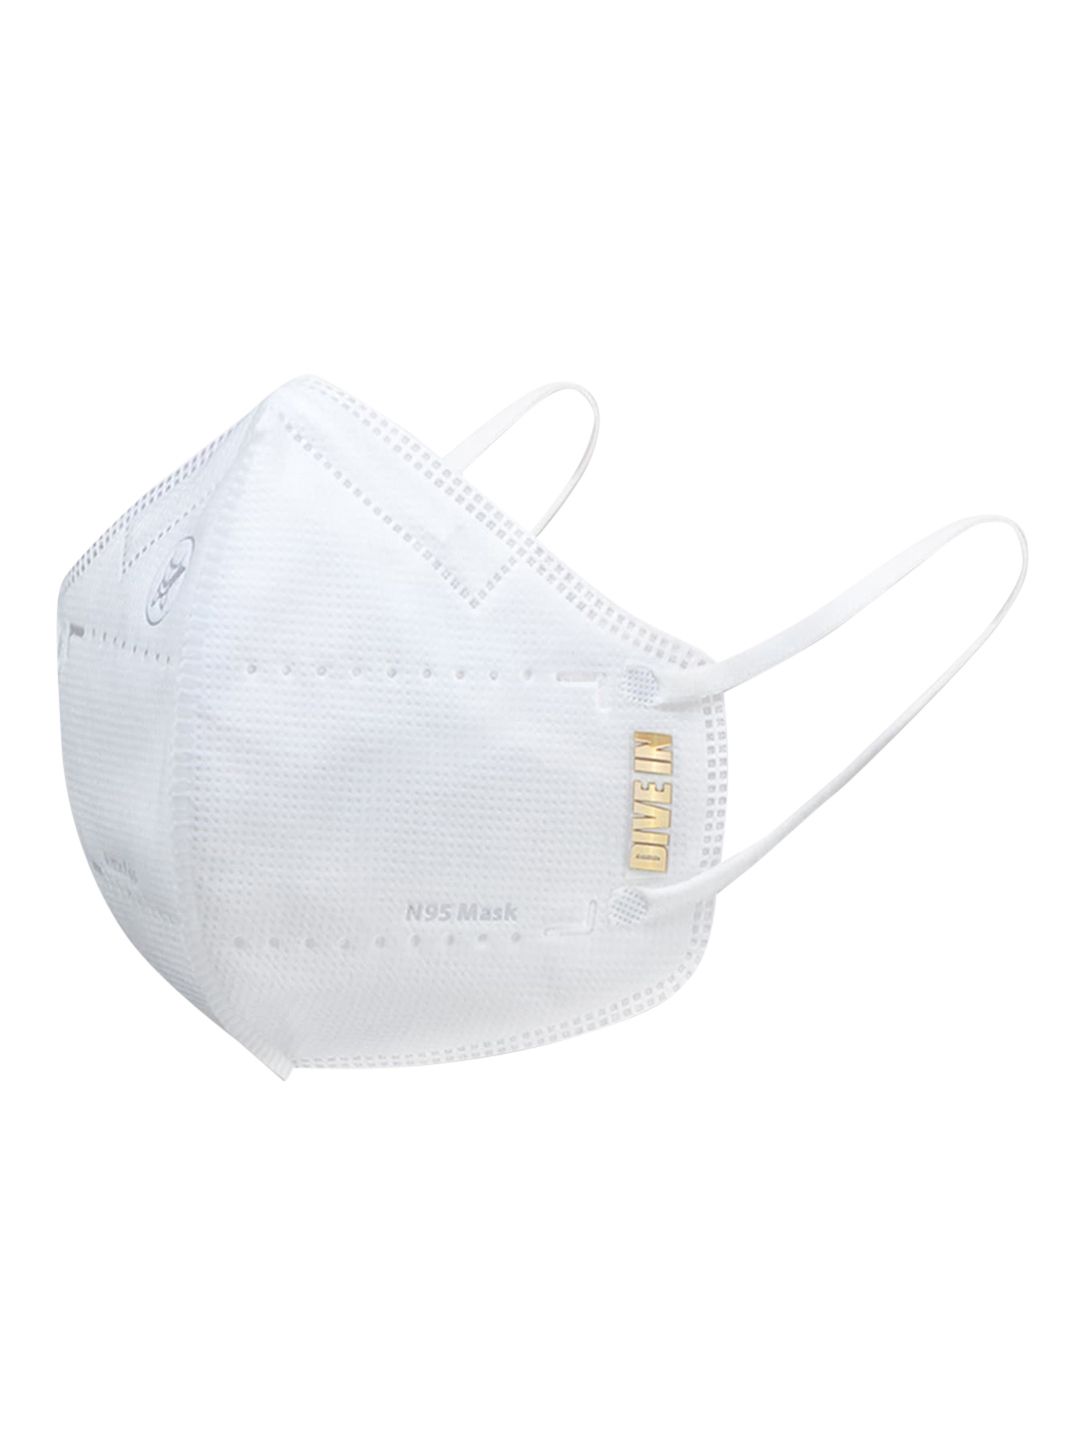 Arctic Fox Pack Of 2 White 5-Ply Respiratory N95 Masks Price in India